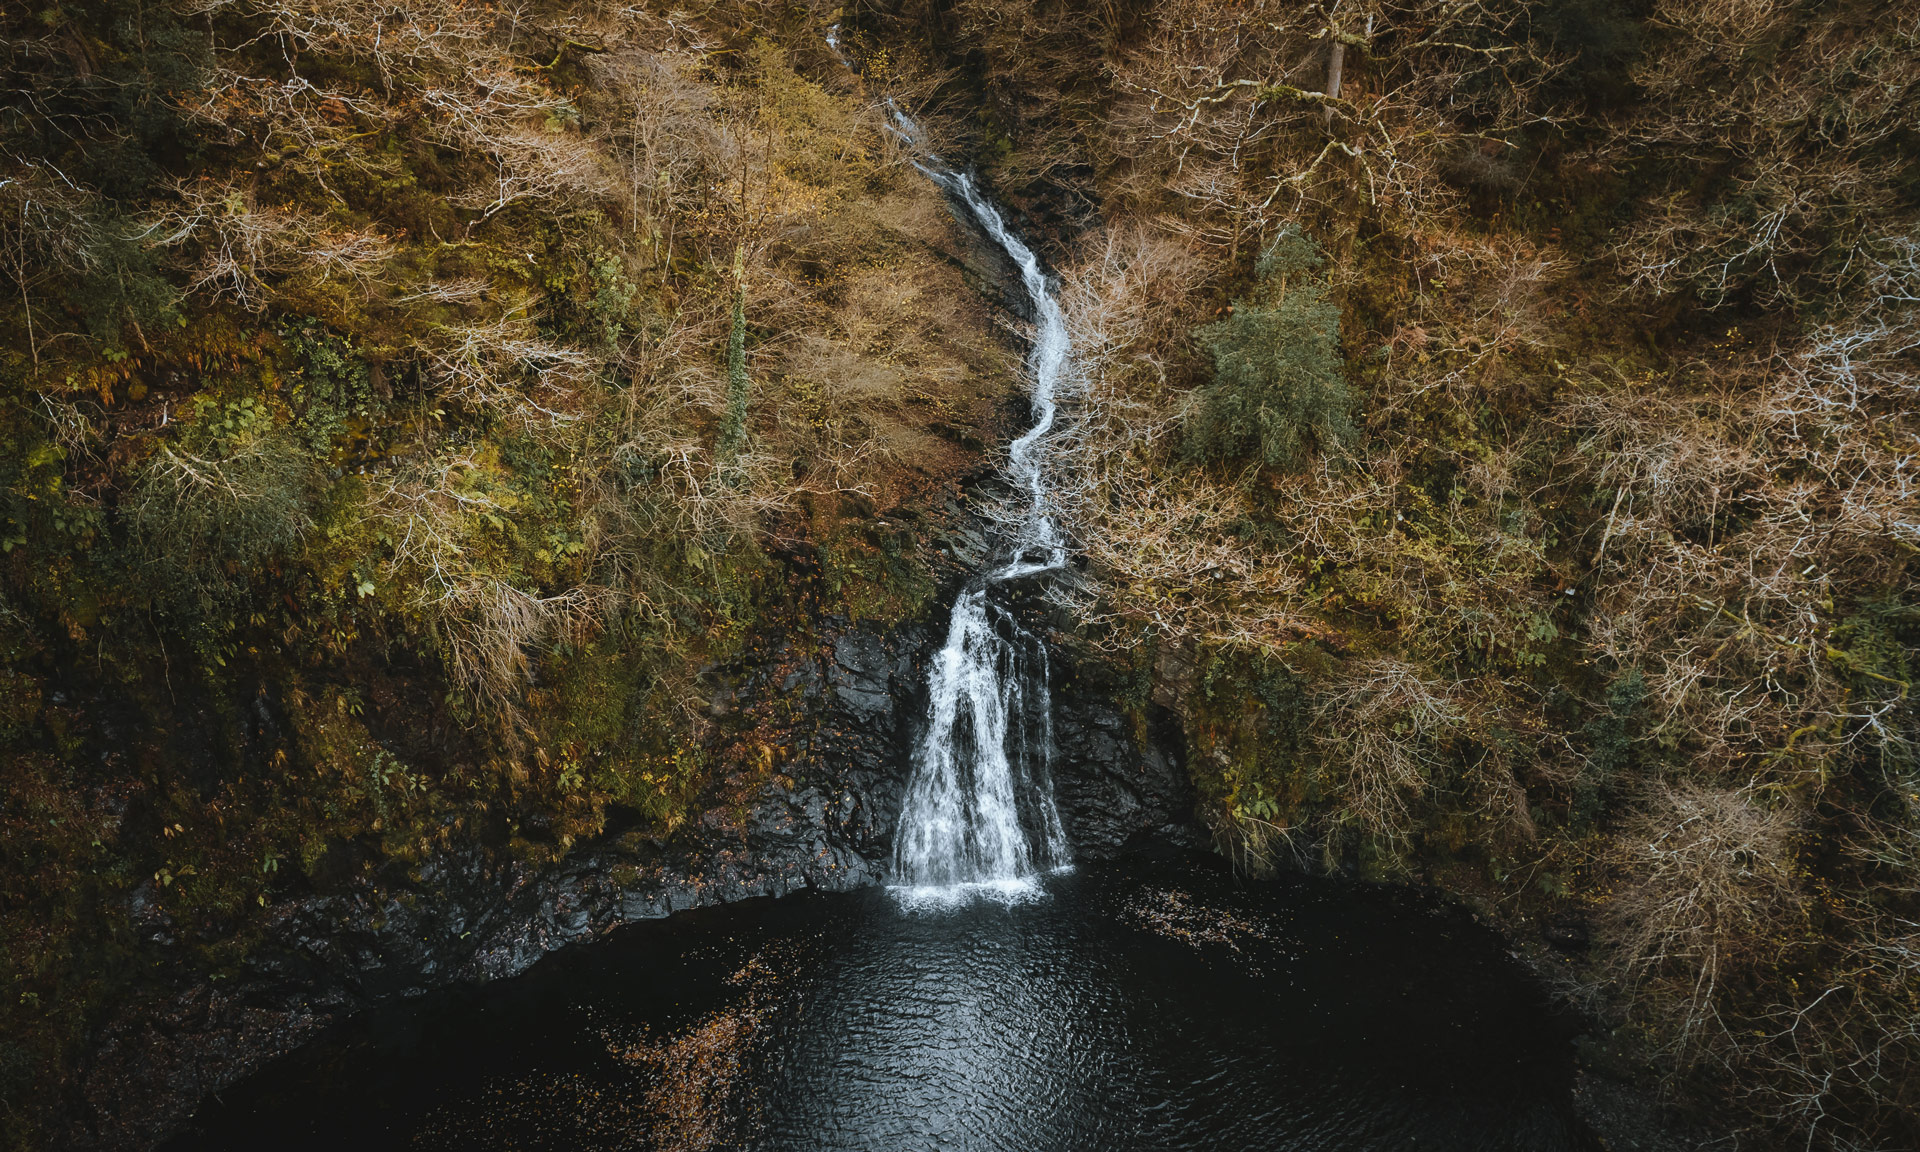 Photo of waterfall at Felenrhyd and Llennyrch woods on an autumn day.